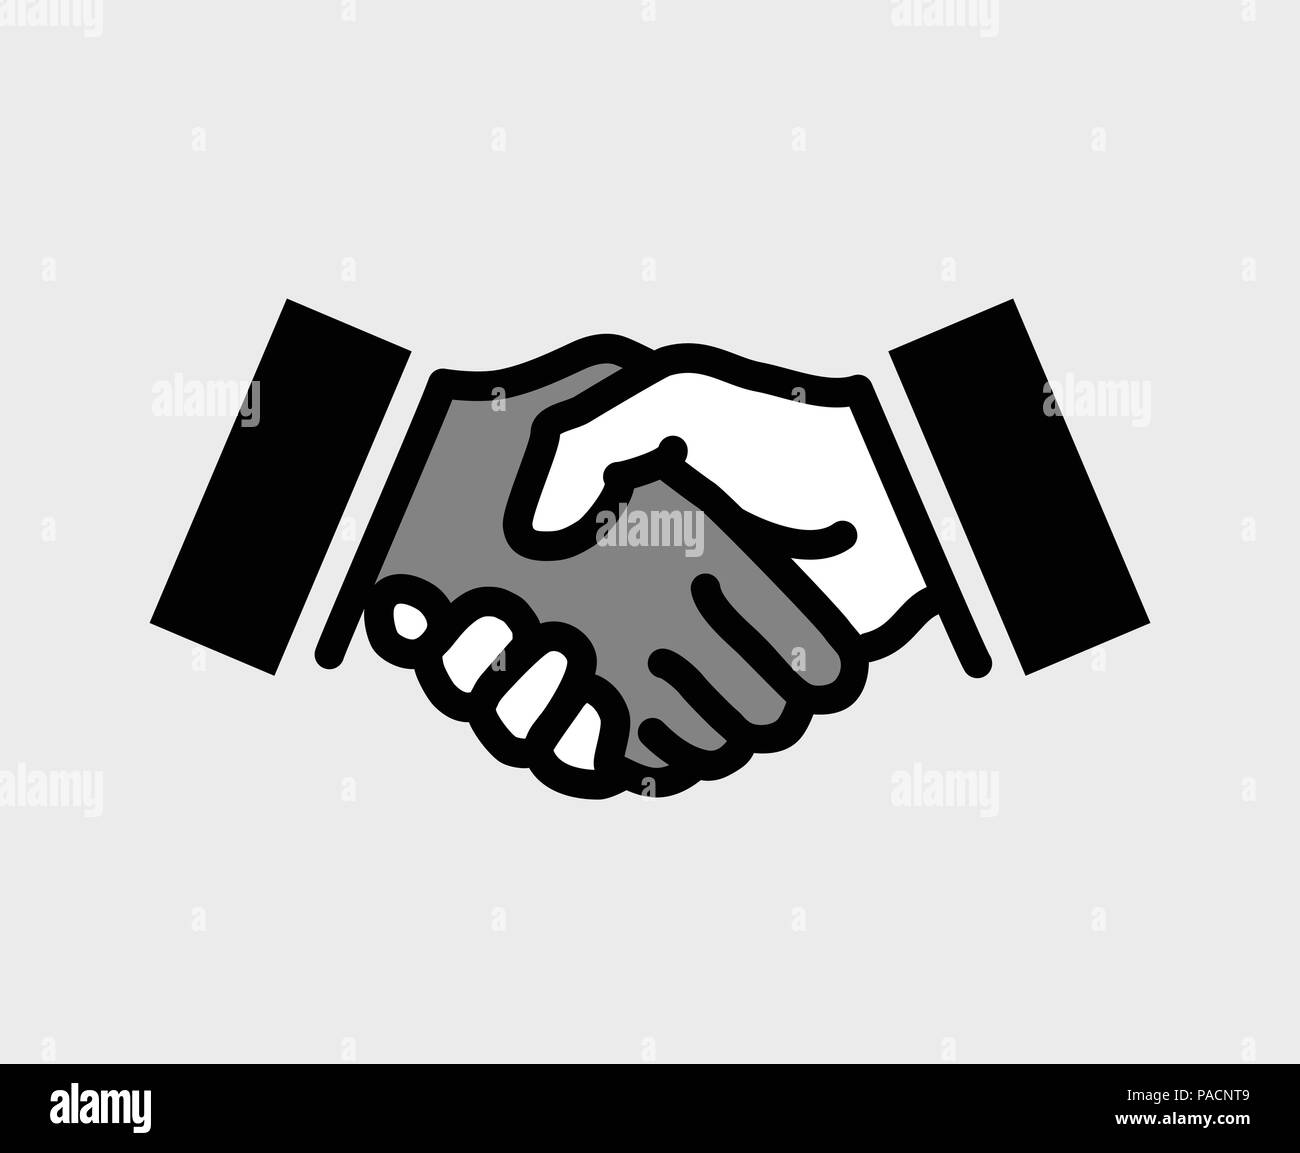 Handshake, solidarity or deal symbol. Flat EPS 8 vector, isolated on white background. The hands can easily be colored independently of each other. Stock Vector